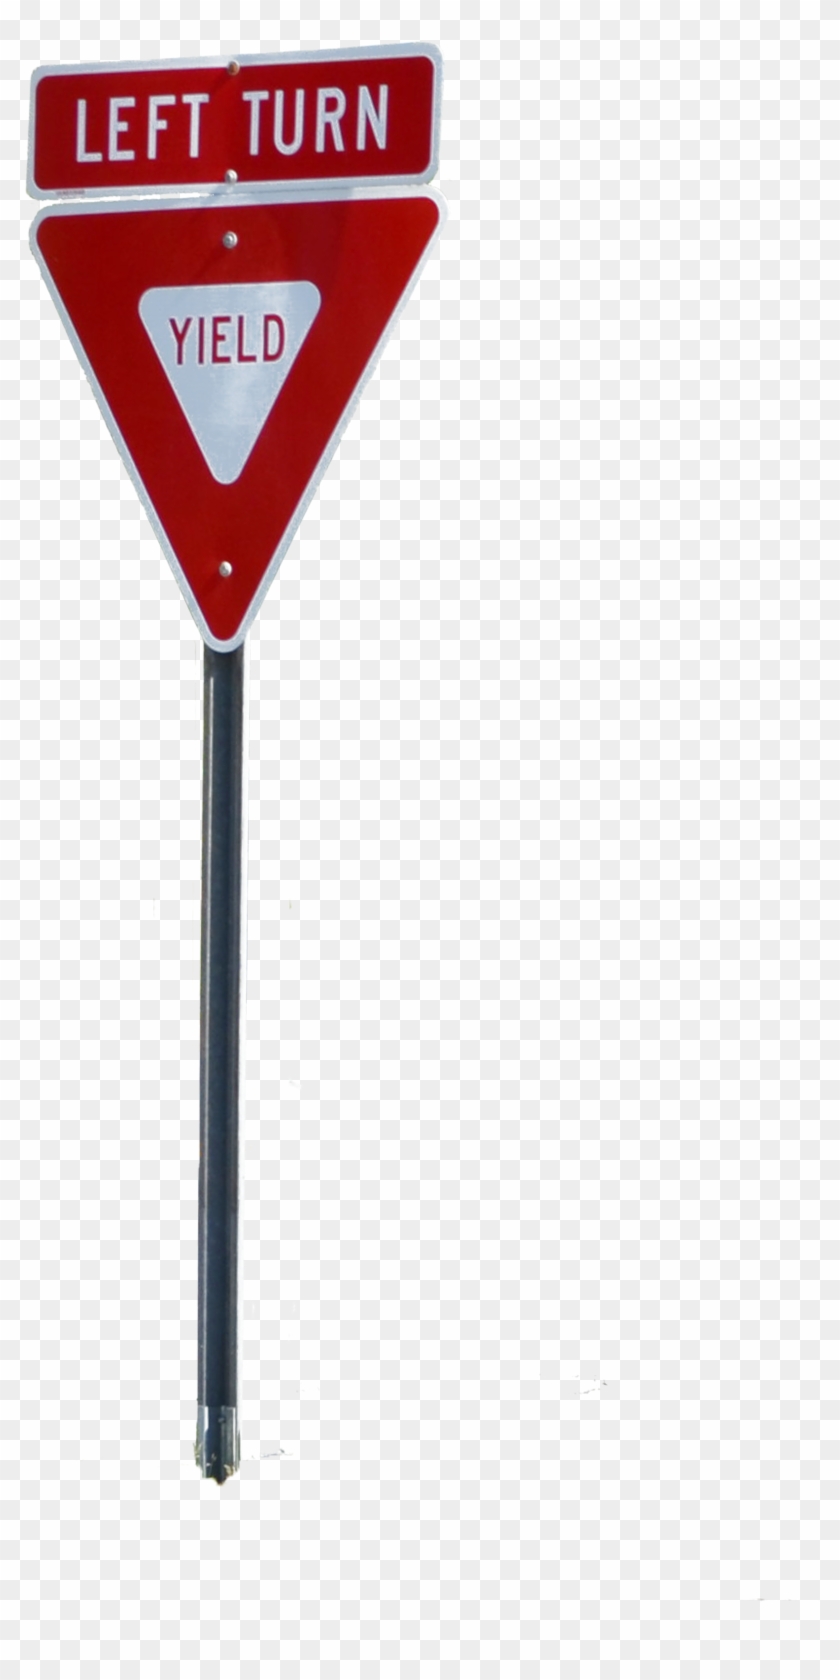 Left Turn-yield Street Sign Stock Photo 0104 Png By - Traffic Sign #883199